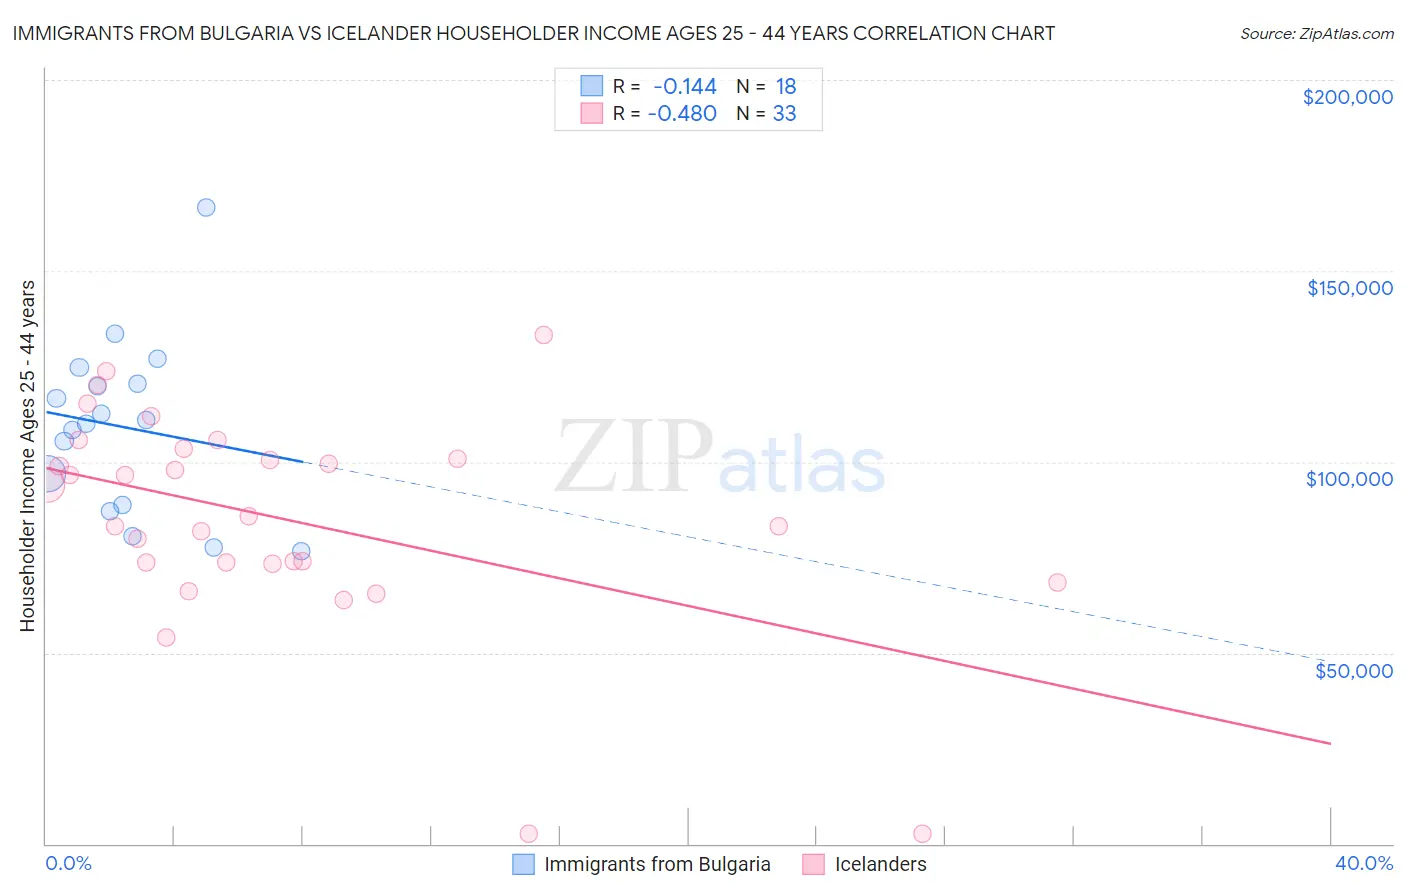 Immigrants from Bulgaria vs Icelander Householder Income Ages 25 - 44 years